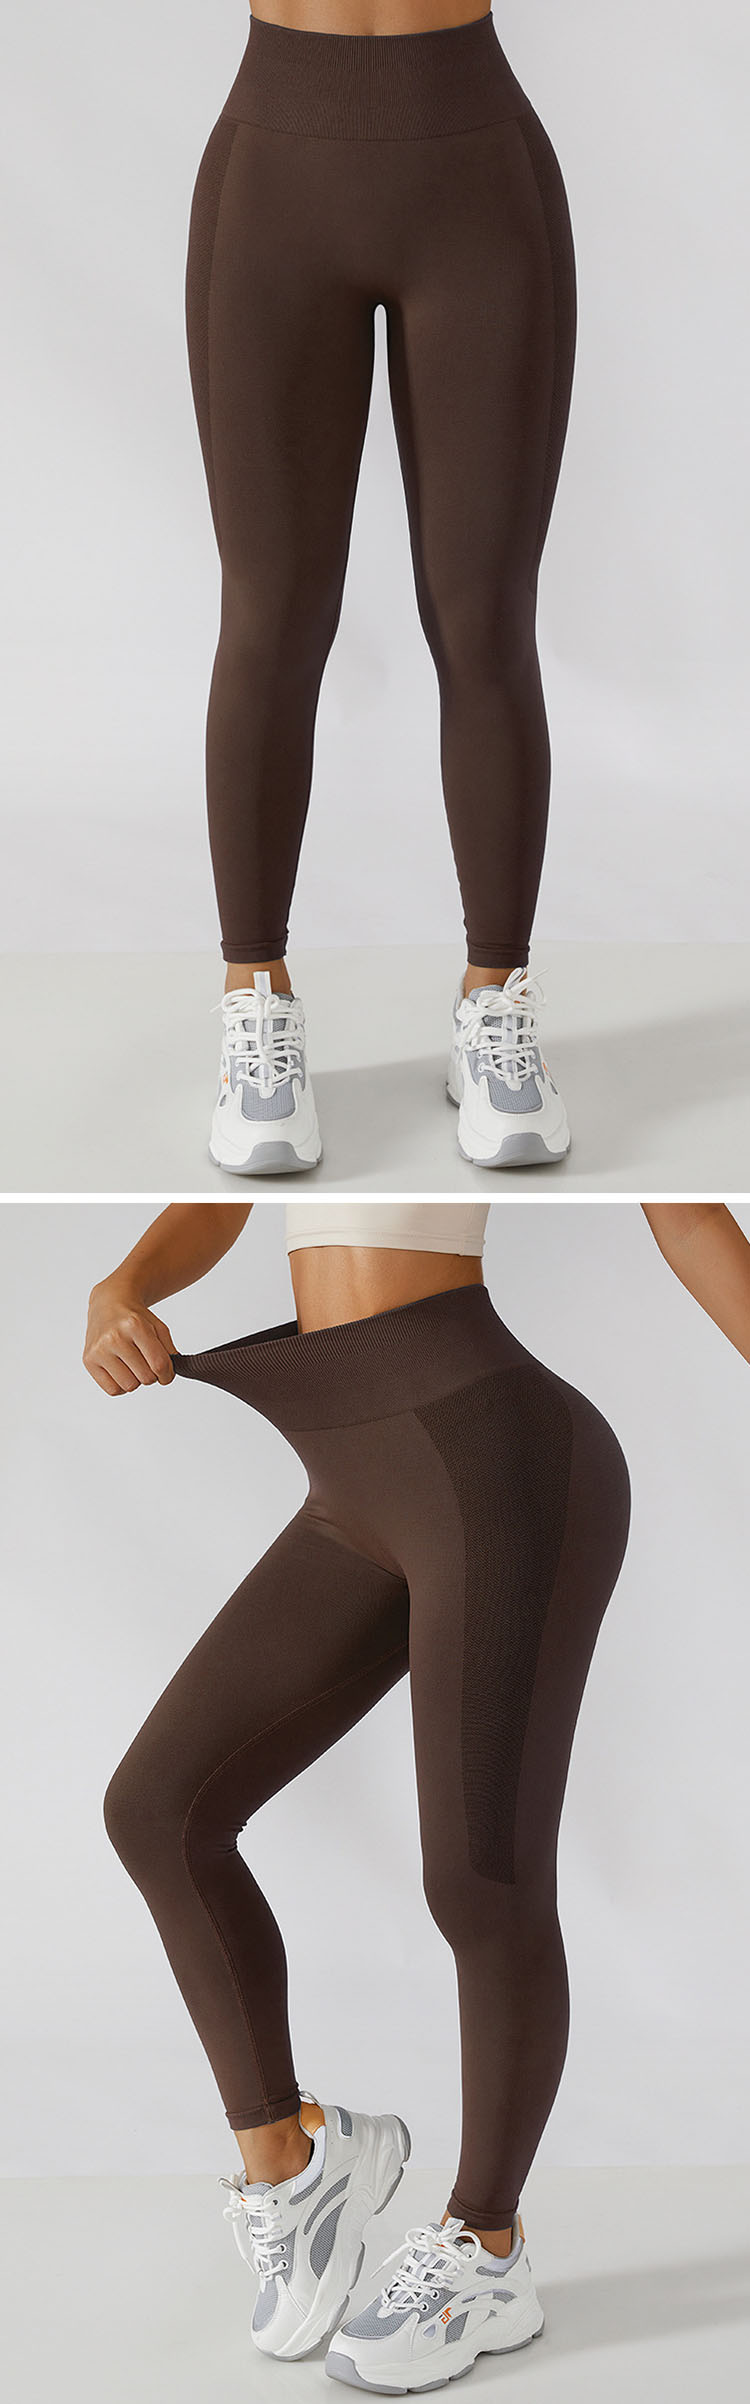 The hip midline design provides a stronger lift and a more peach hip shape